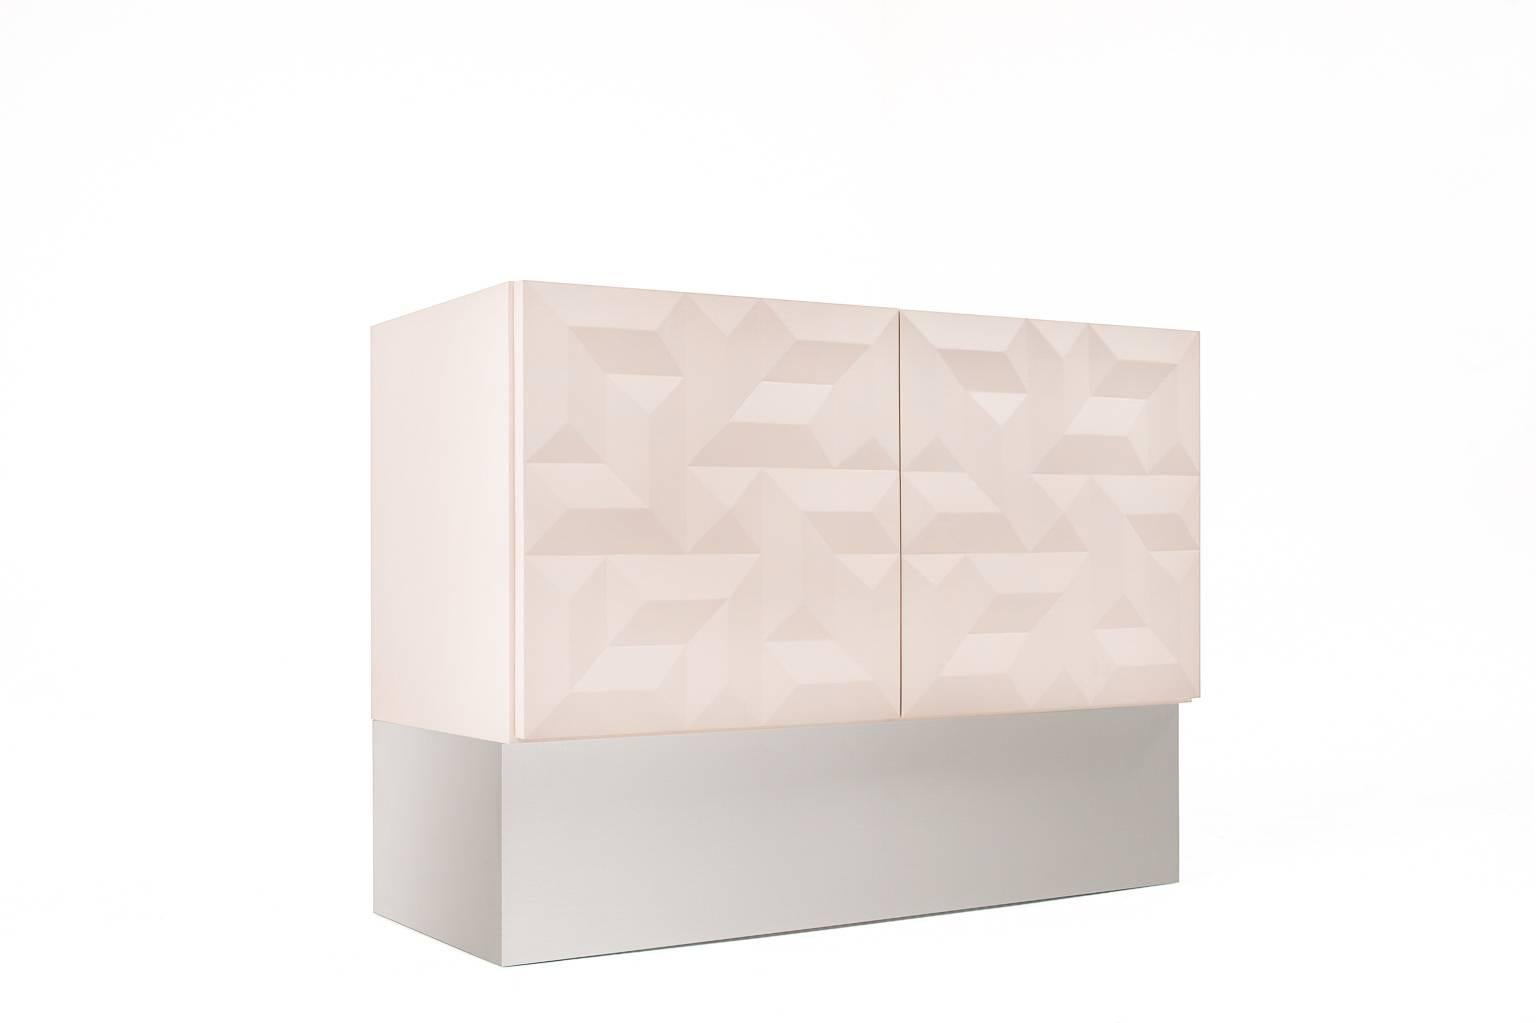 Impressive Brutalist credenza, Belgium, 1970s. Brutalist design with a stunning three-dimensional Graphic pattern. Finished in a very attractive ‘soft nude’ color both in – and outside and stands on nice a modern looking brushed steel base. The